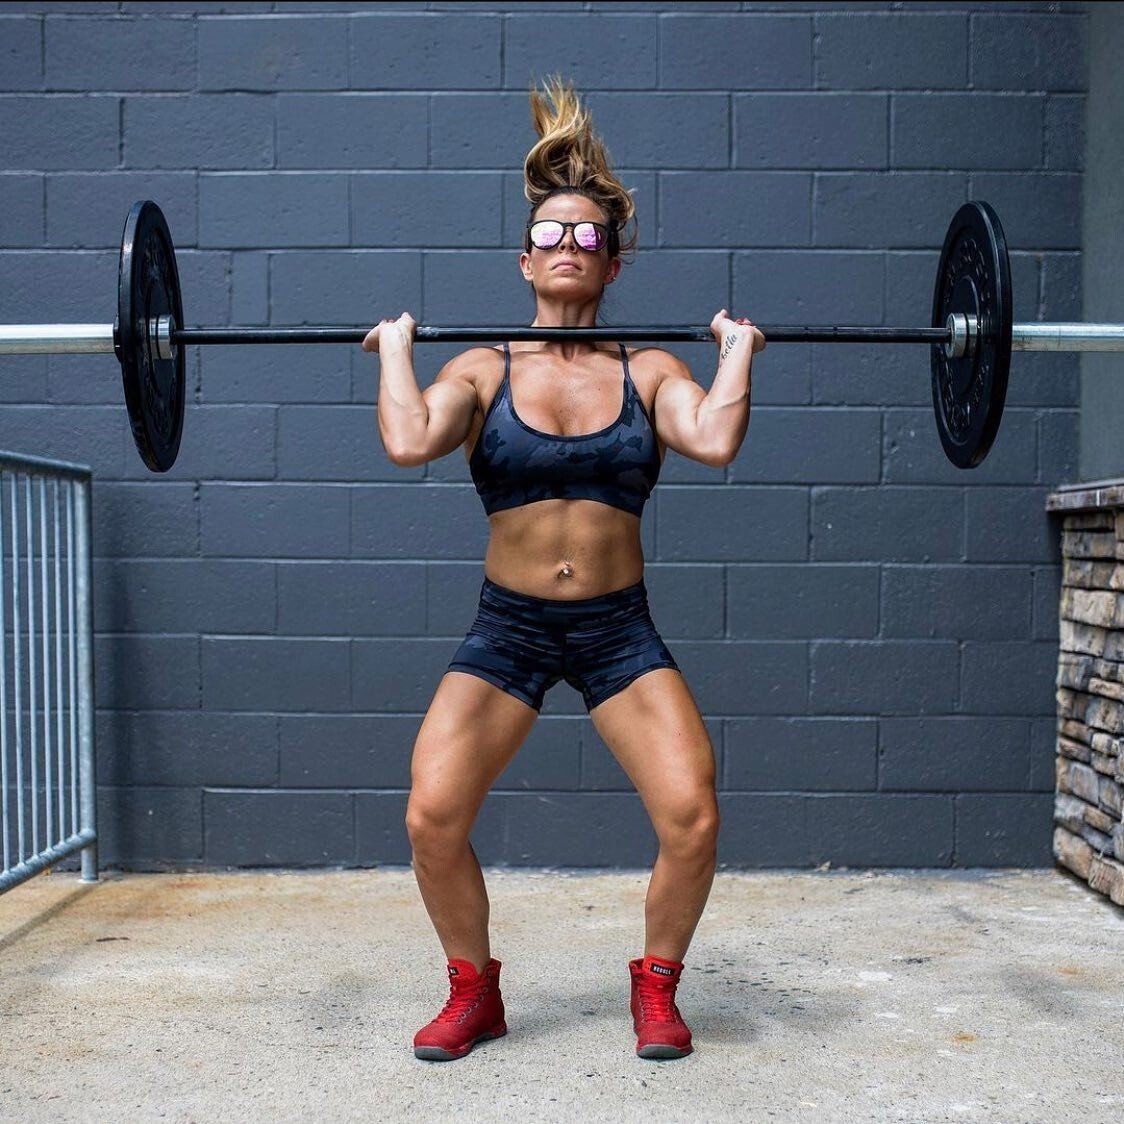 The 2021 CrossFit Open starts tomorrow. Photo: CrossFit/Facebook